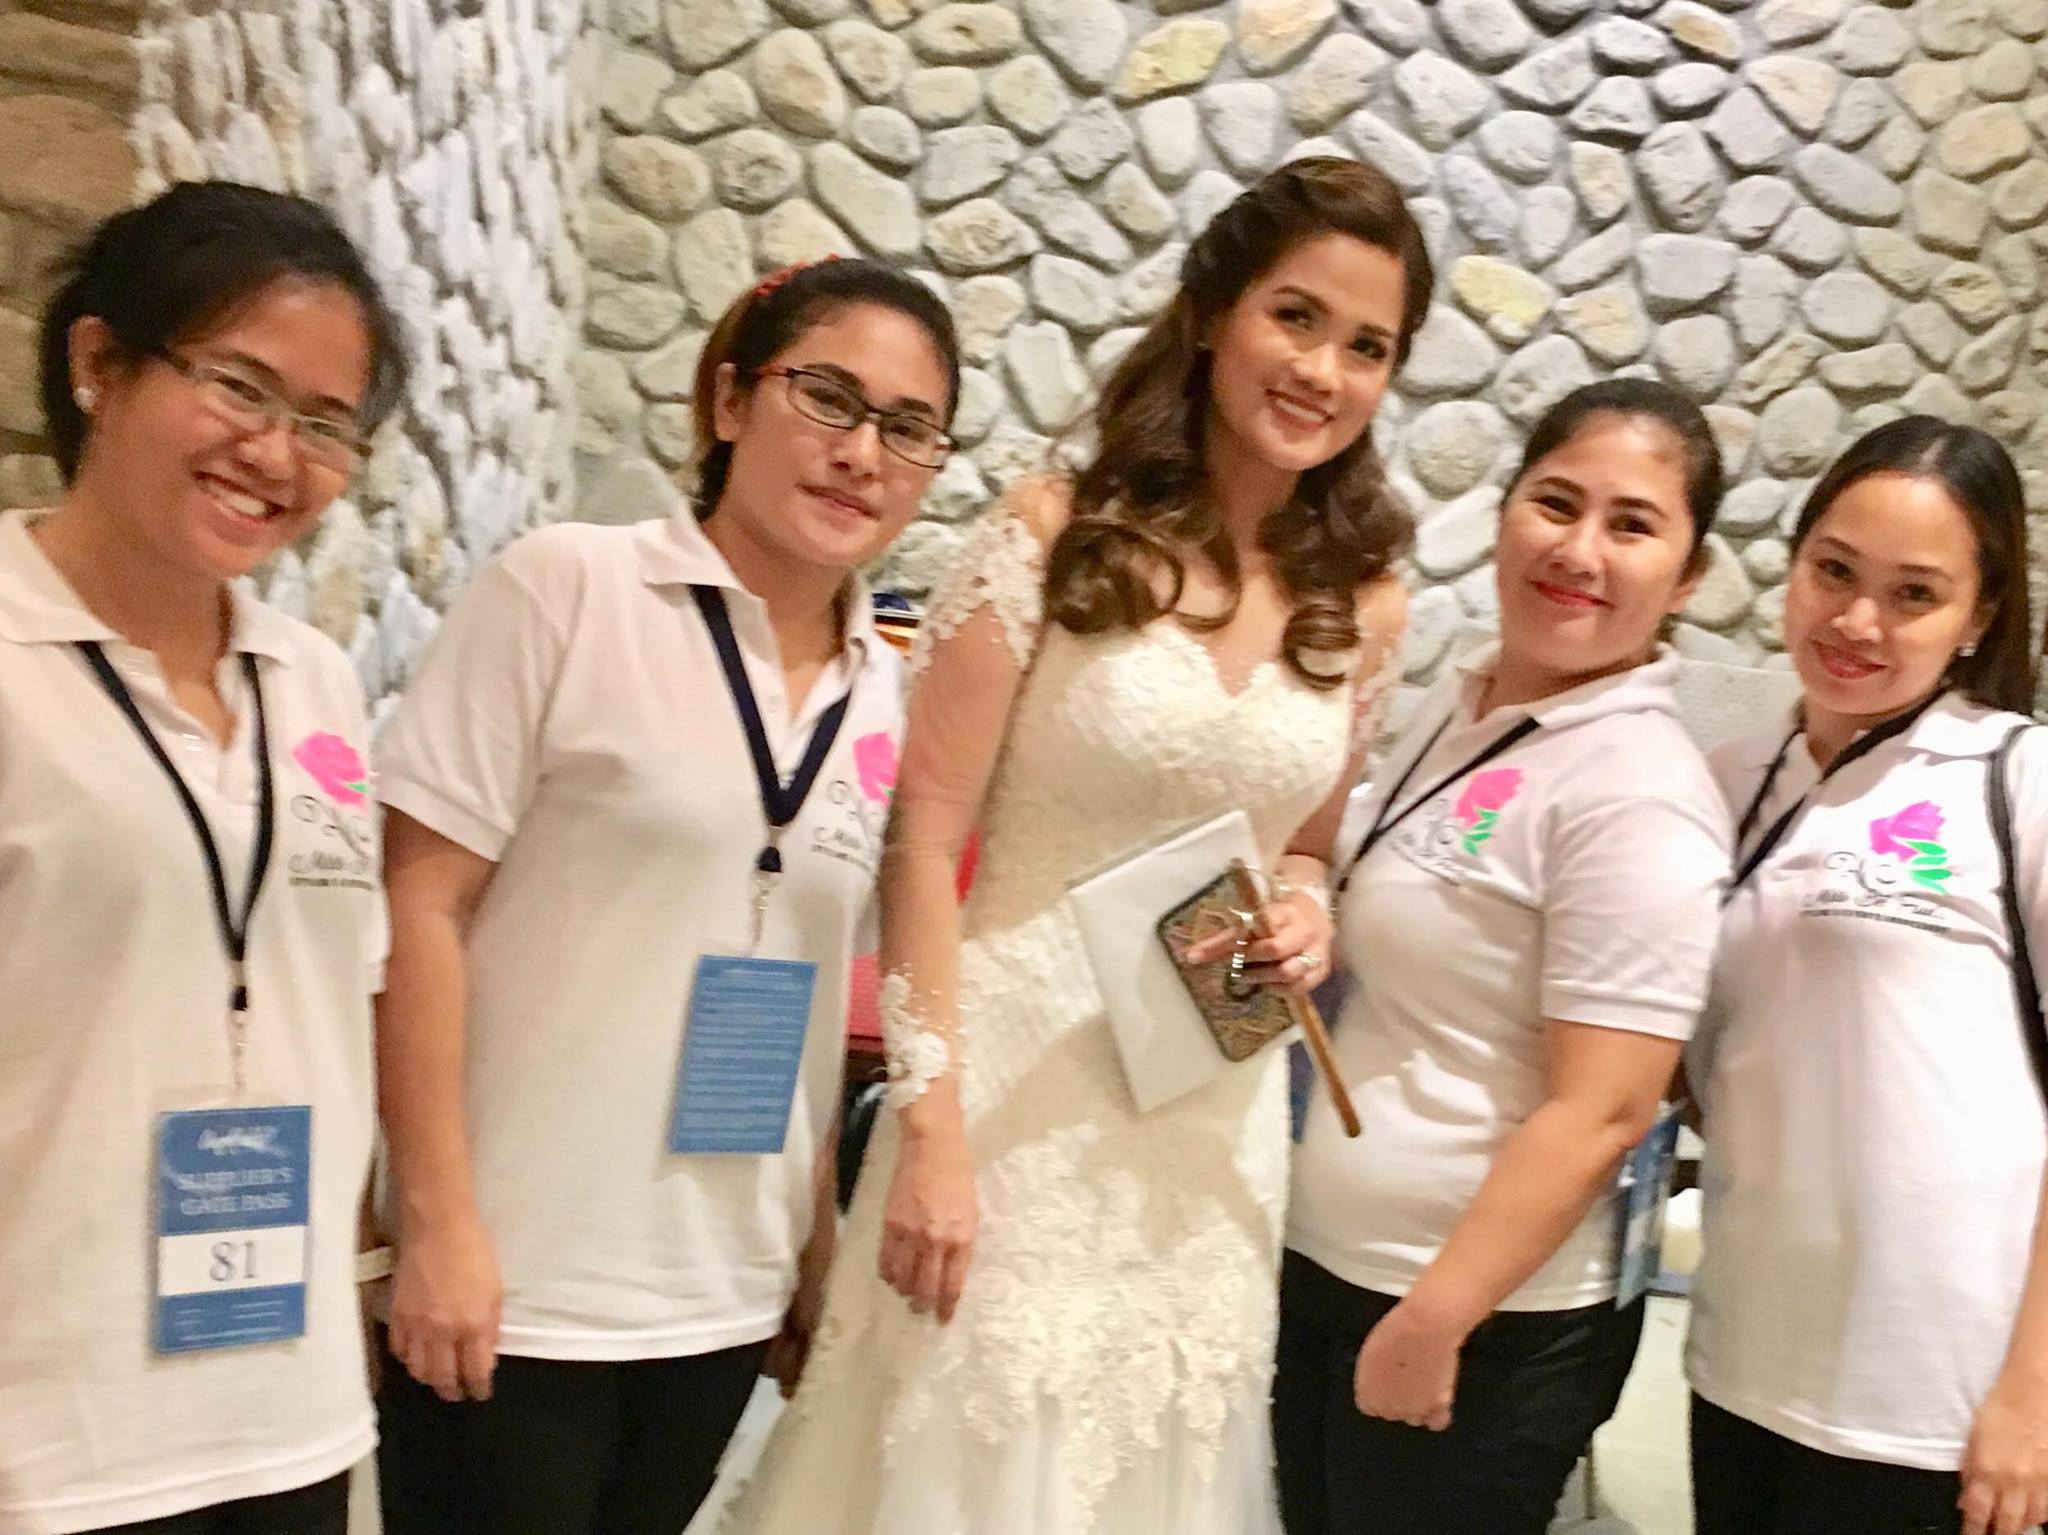 Our Team with one of our gorgeous brides